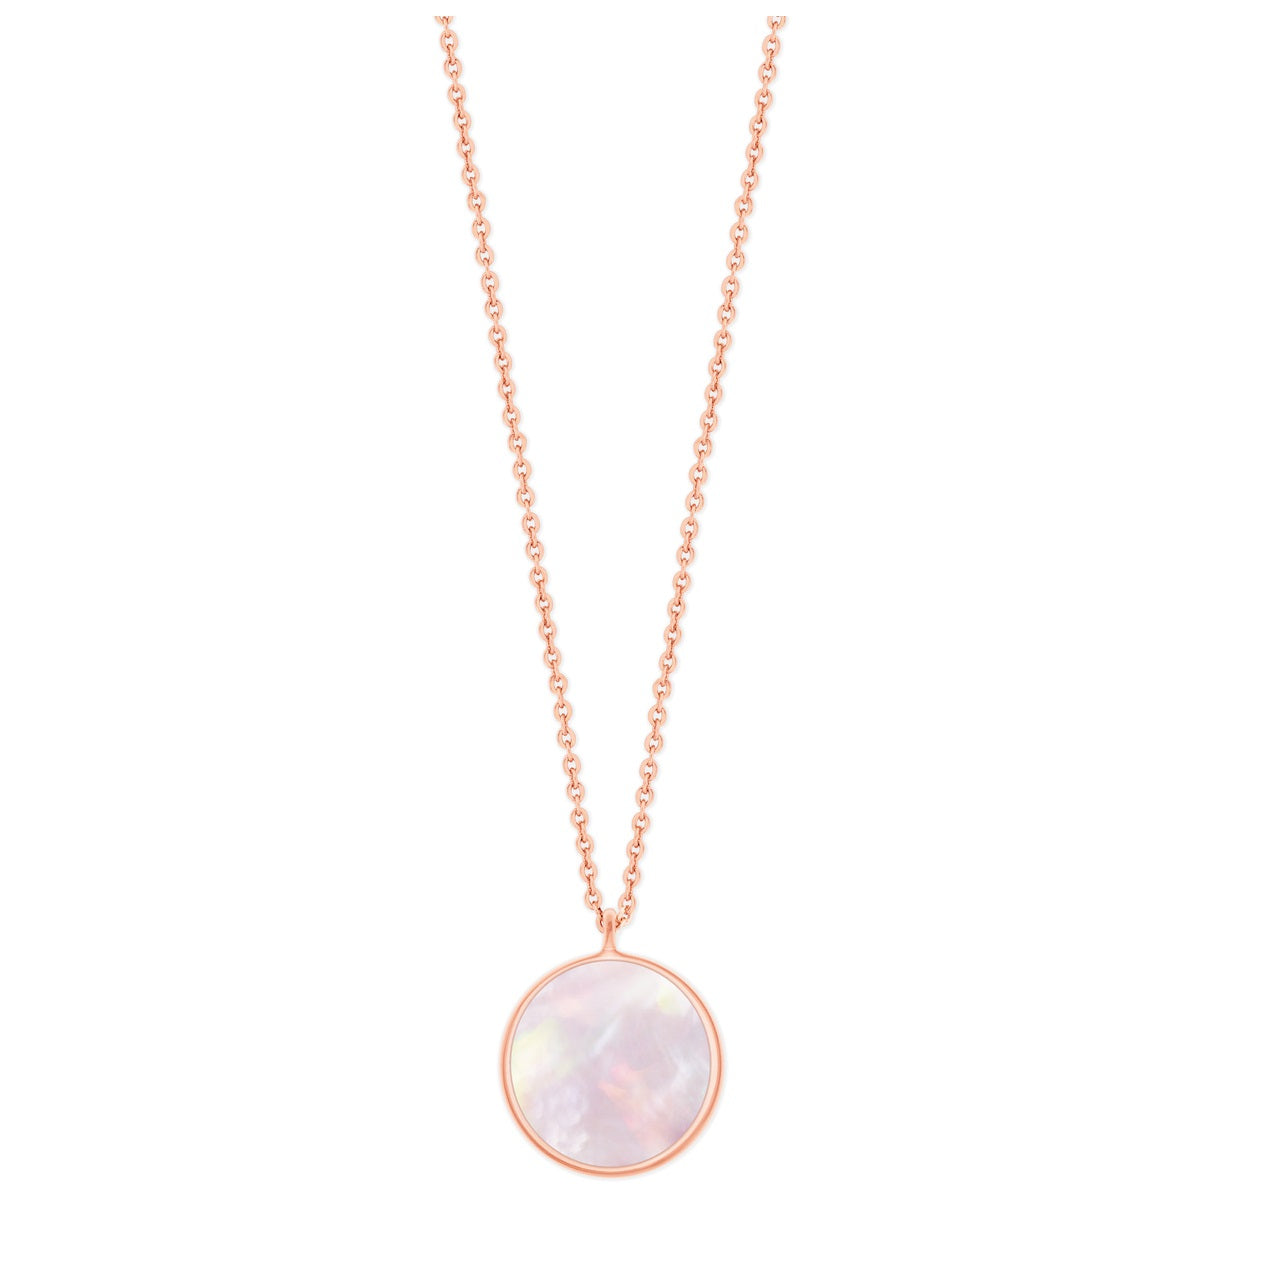 Tipperary Crystal Full Moon Pendant - Rose Gold